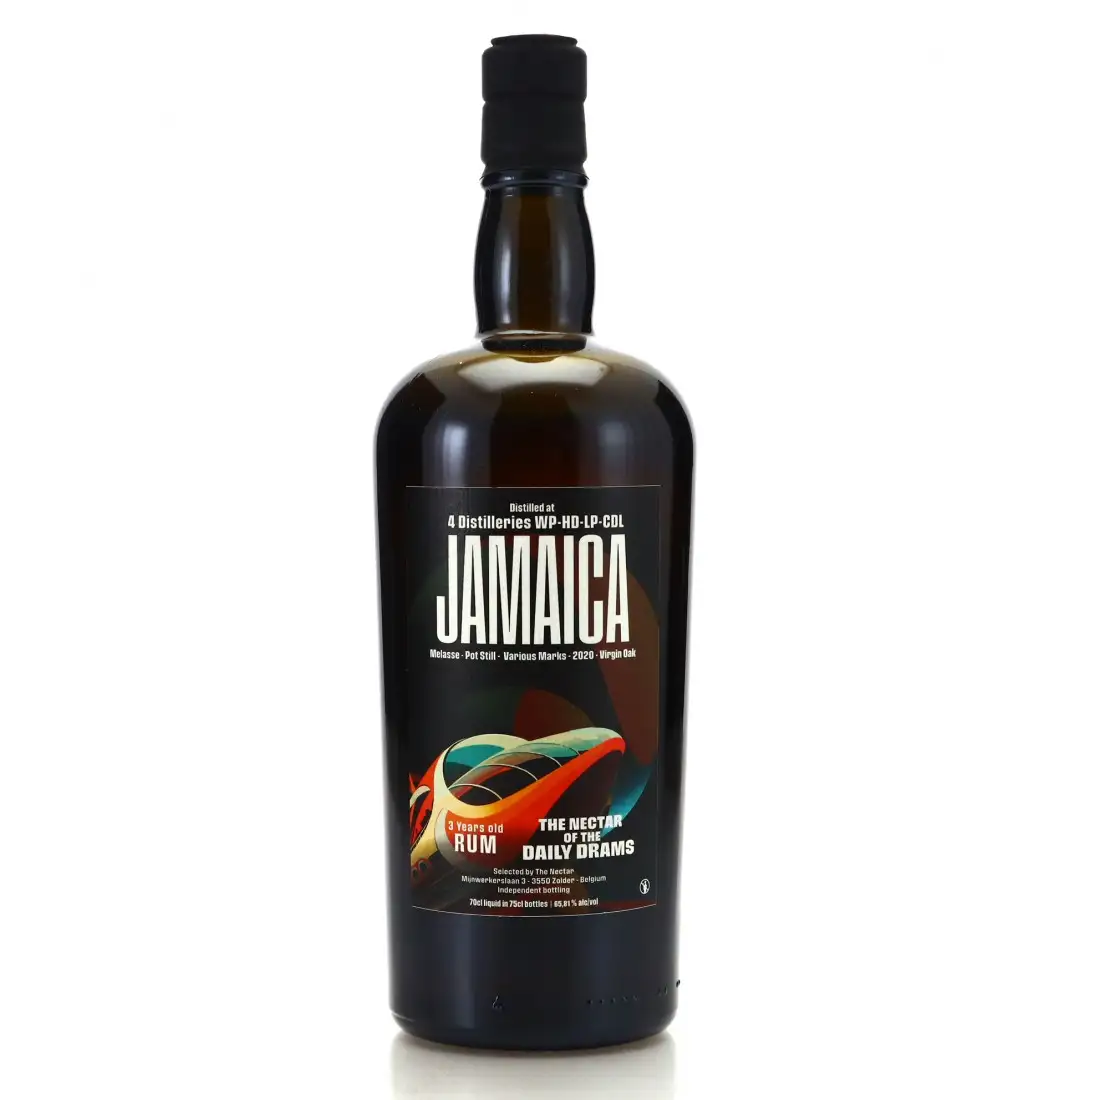 Image of the front of the bottle of the rum The Nectar Of The Daily Drams Jamaica WP-HD-LP-CDL